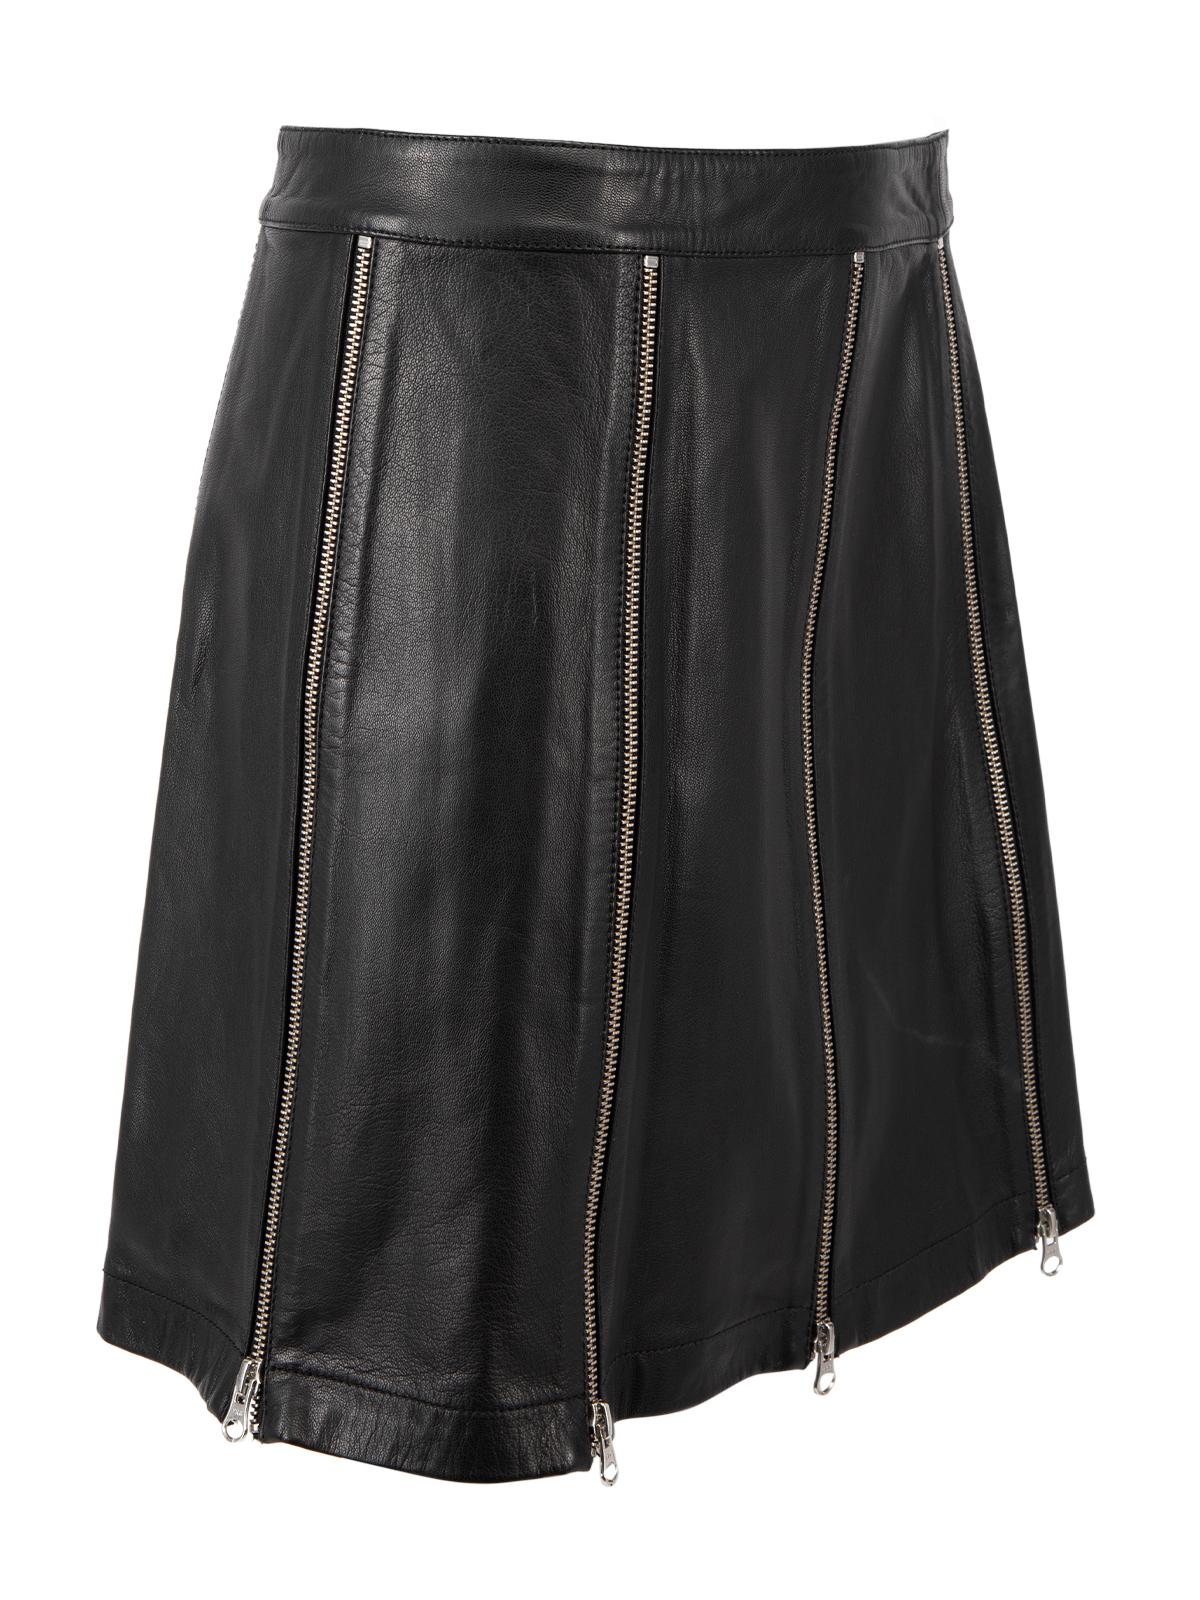 CONDITION is Very good. Hardly any visible wear to skirt on this used MCQ designer resale item.  Details  Black  Leather  A line Zip detail   Mini   Made in INDIA   Composition 100% MATERIAL Care instructions: Professional dry clean only   Size &